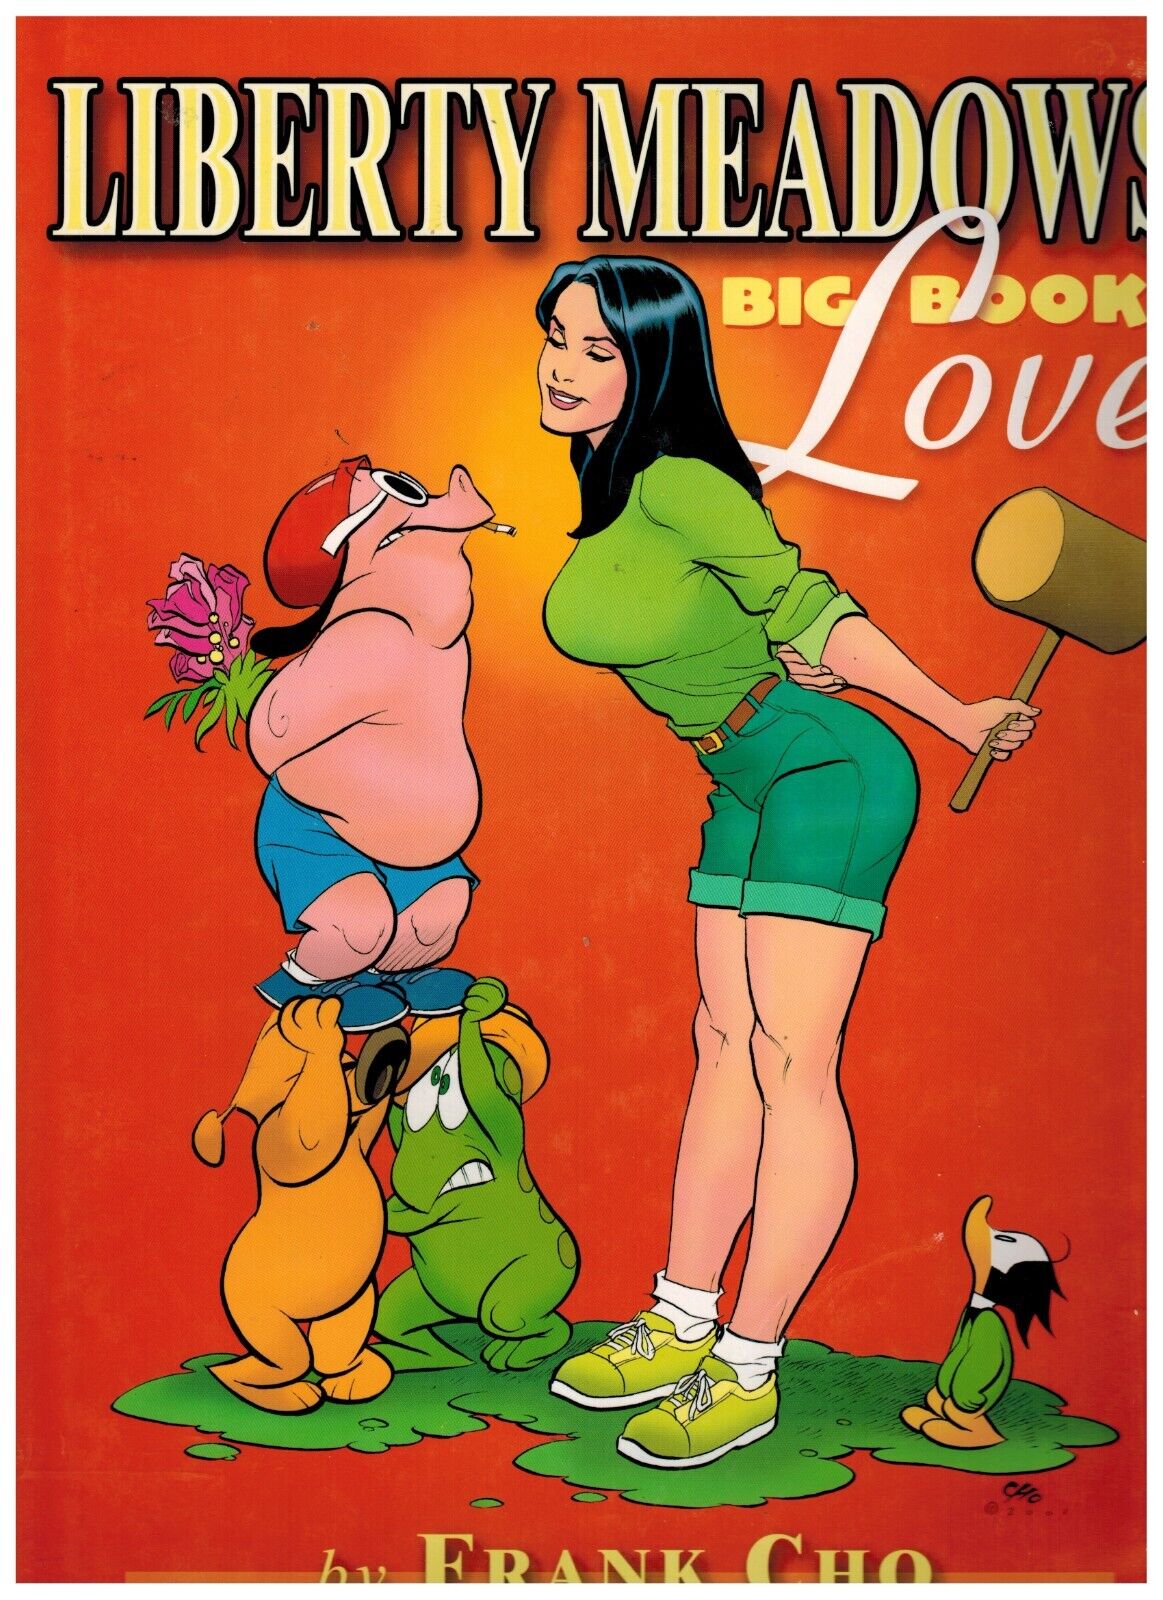 Liberty Meadows BIG BOOK OF LOVE Hardcover Book 2001 1st Print By Frank Cho MINT